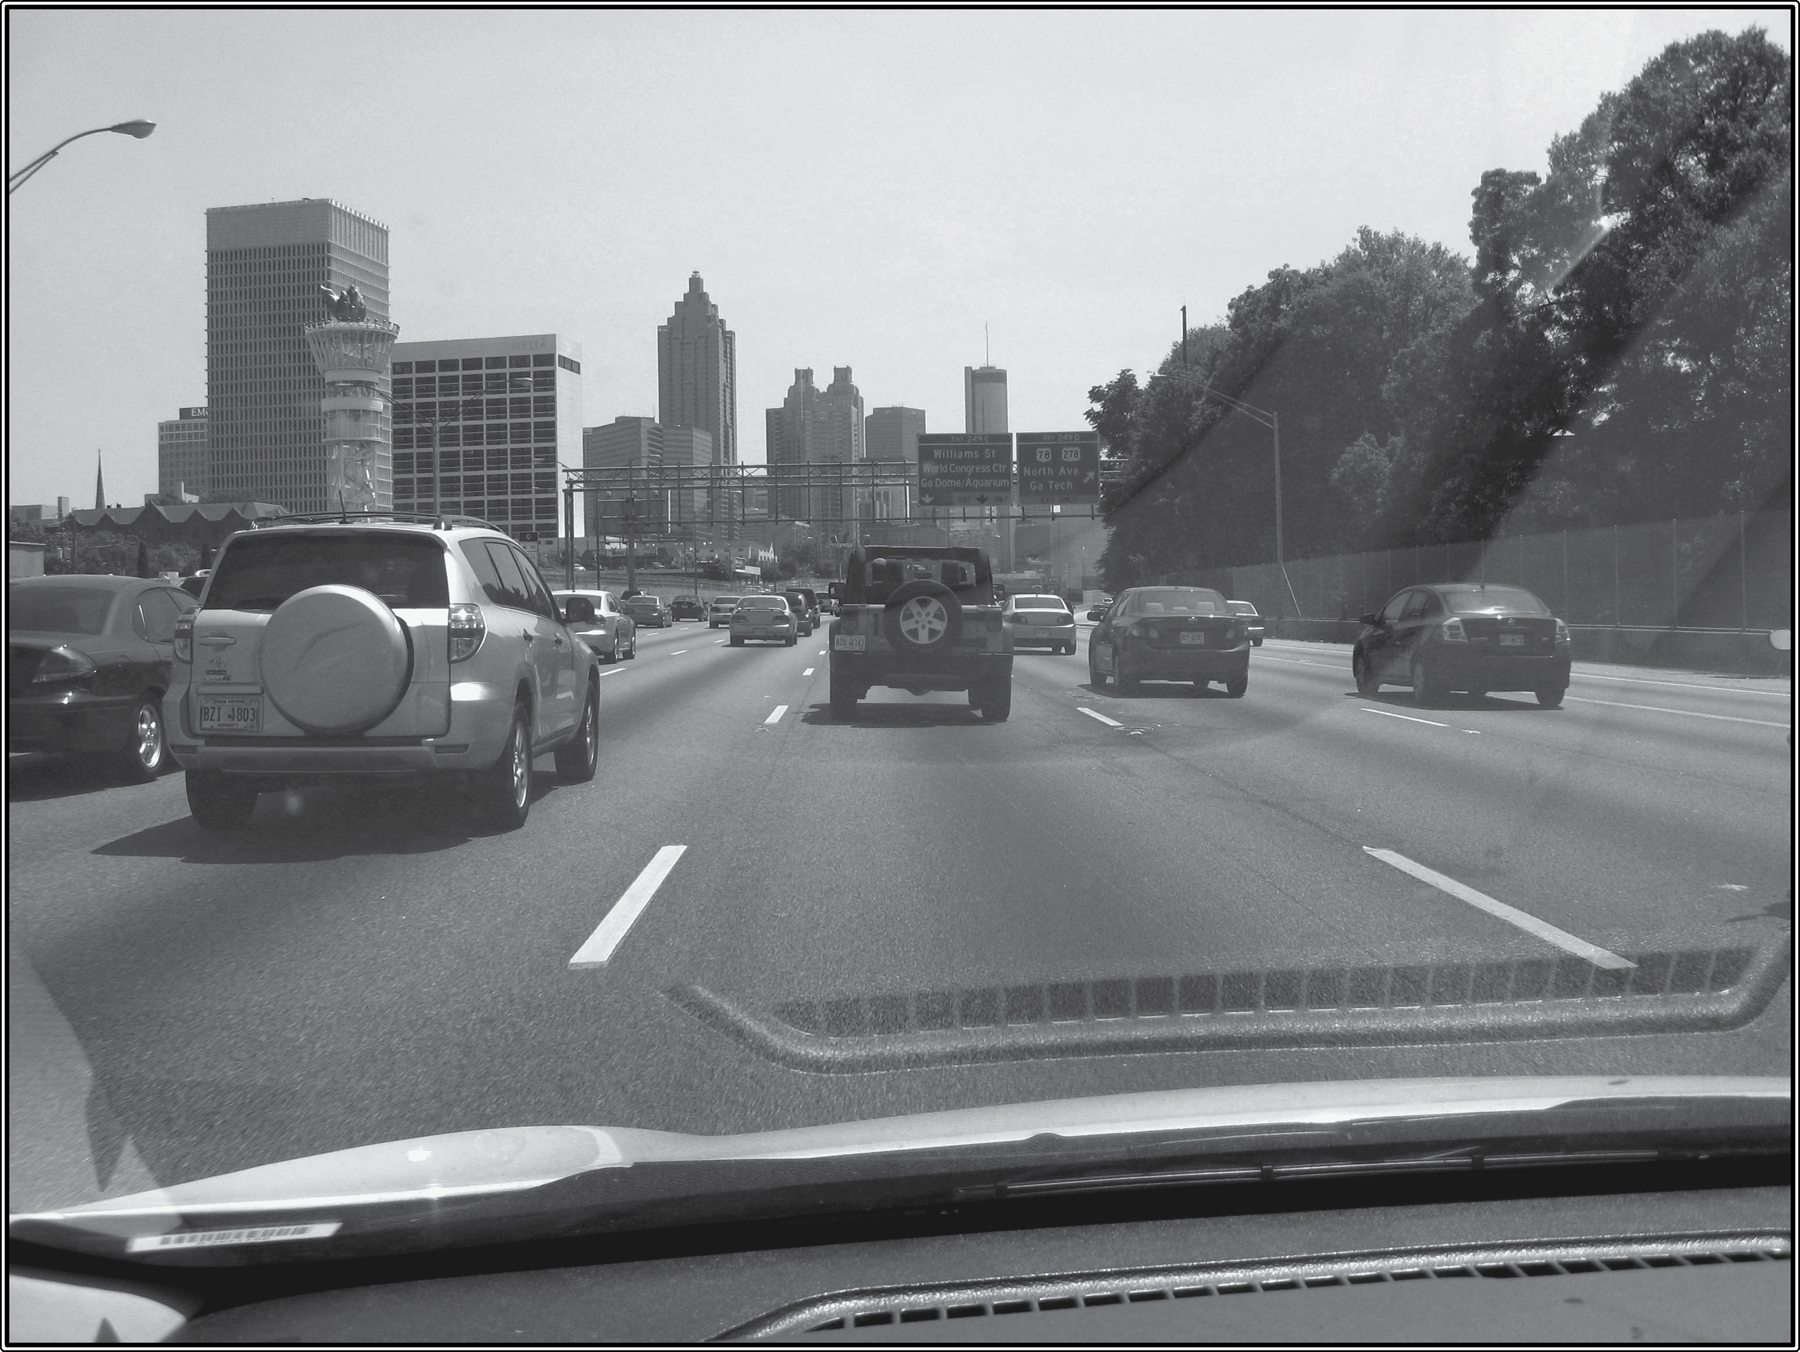 These two photosof traffic on I-7585 and bikers on the BeltLinerepresent two - photo 2